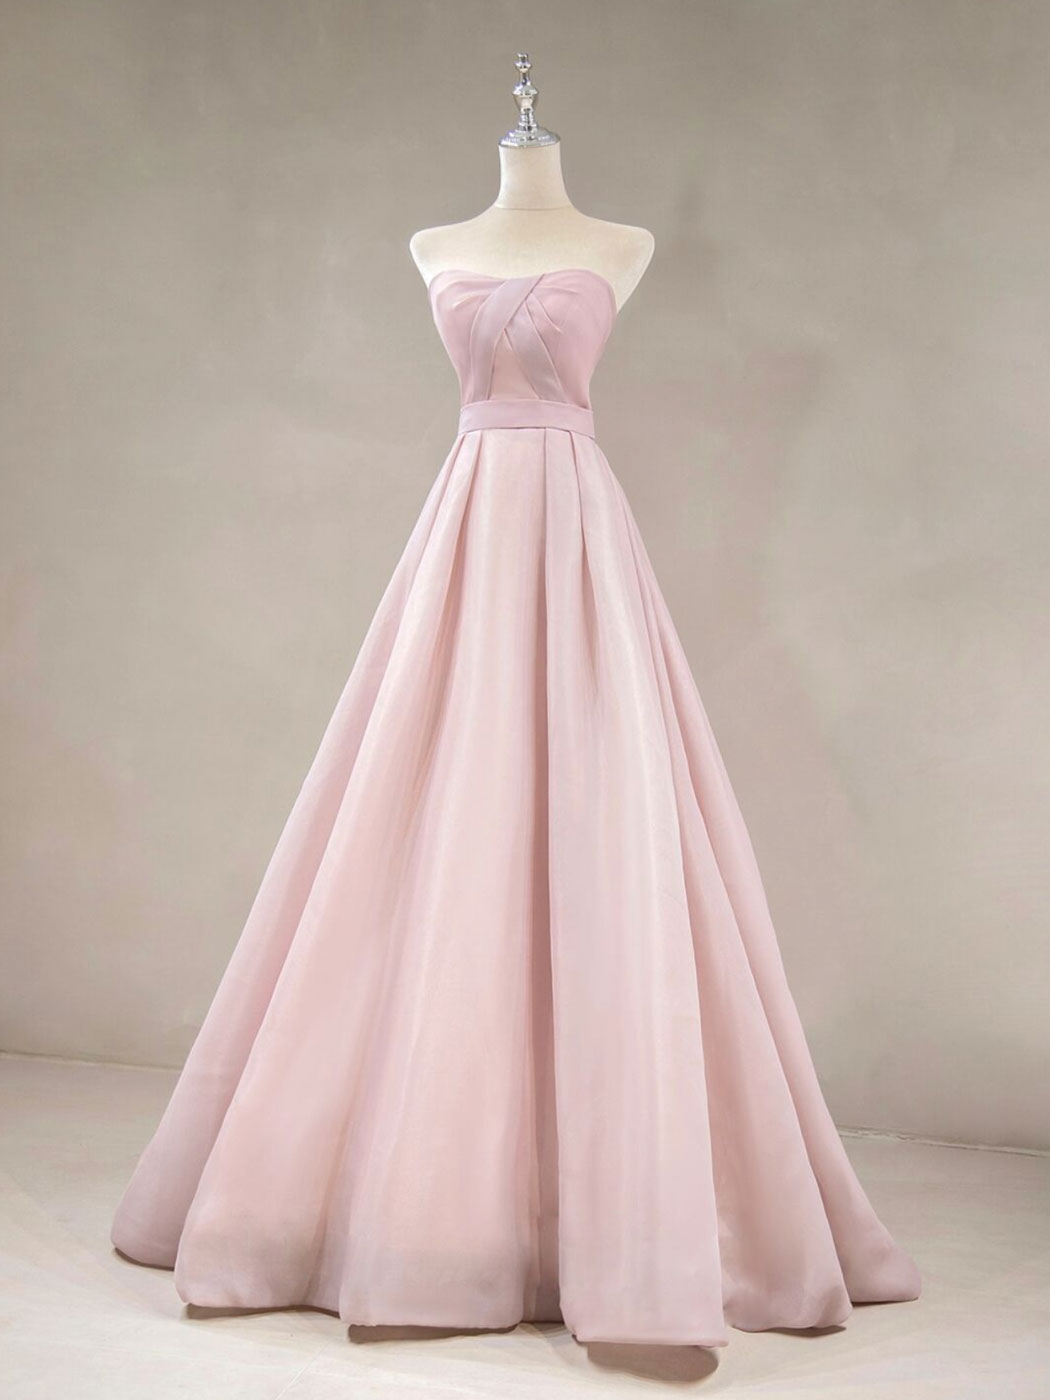 Bridesmaid Dresses Champagne, A Line Pink Long Prom Dresses, Formal Pink Bridesmaid Dresses